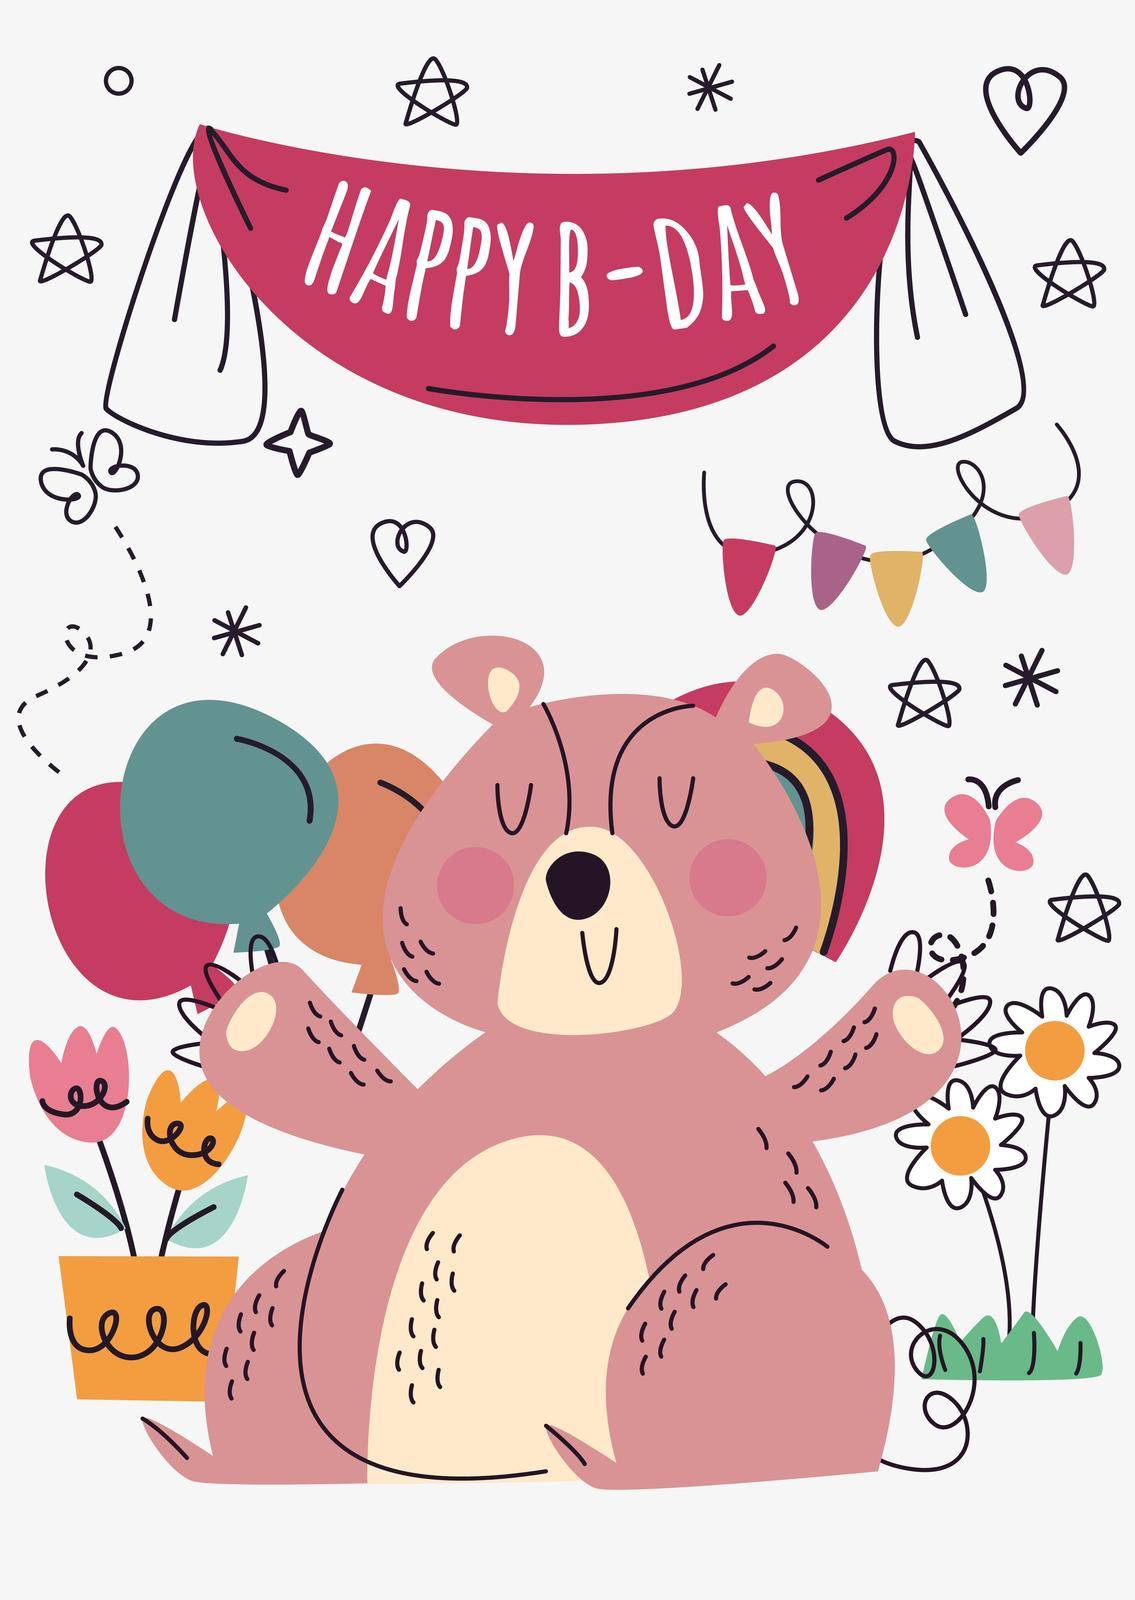 Greeting card with cute hand drawn animal. Birthday card with fun animal. vector illustration by Frutlower